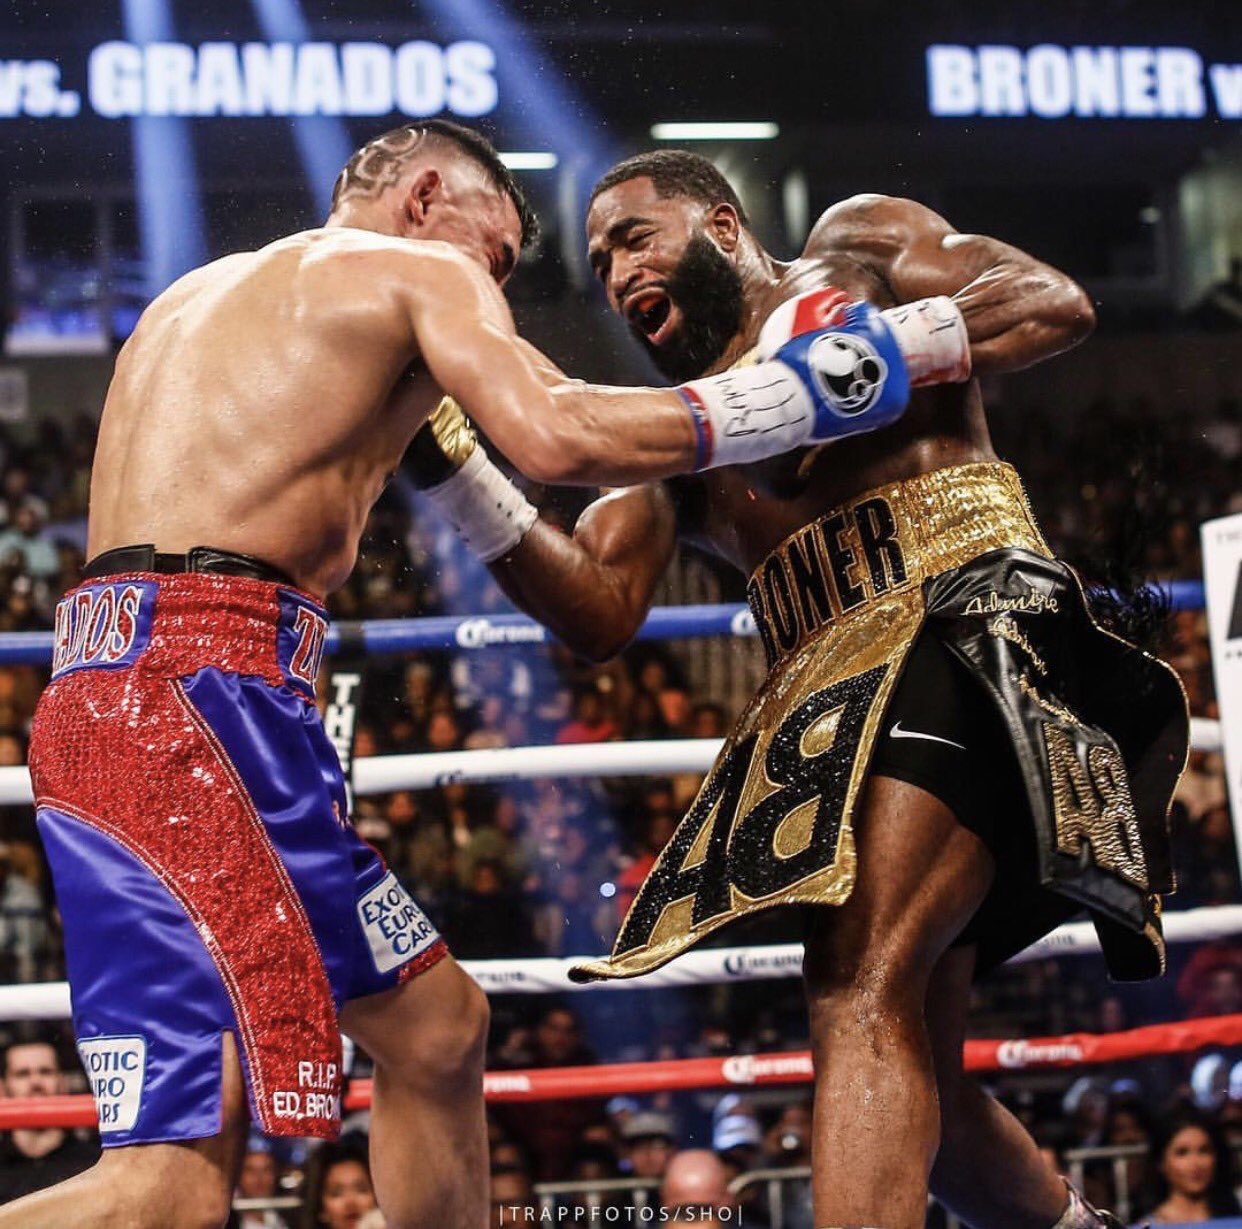 Broner Grinds Out A Tough…But Fair…Win